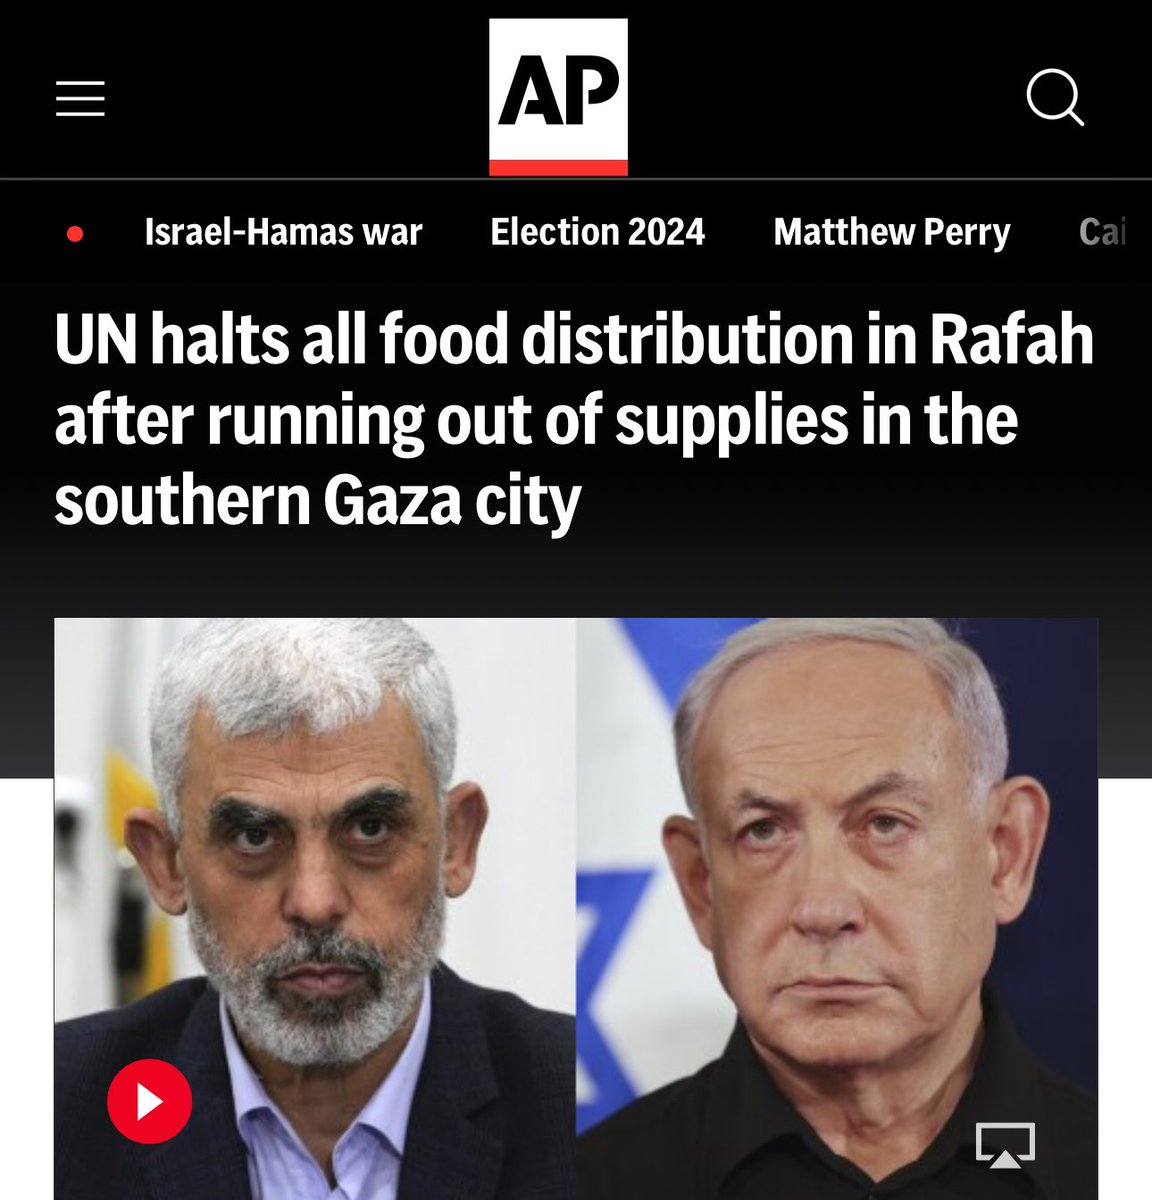 AP: “UN suspended food distribution in the southern Gaza city of Rafah on Tuesday due to a lack of supplies and an untenable security situation caused by Israel’s expanding military operation. The U.N. warned humanitarian operations were nearing collapse.” apnews.com/article/israel…